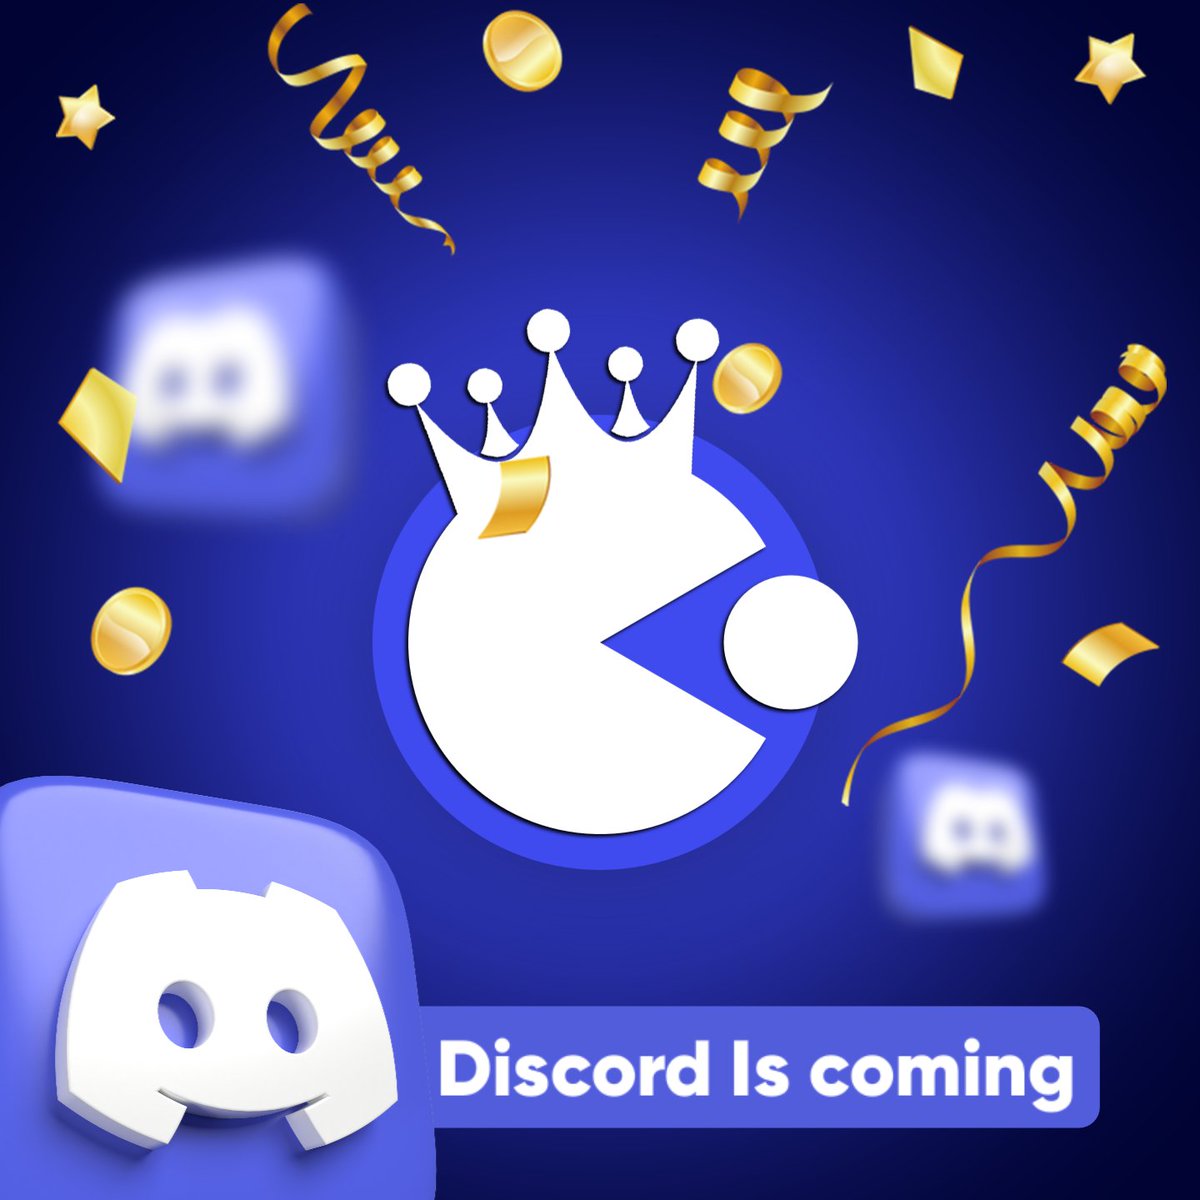 🔵 Discord server coming soon that's it that's the tweet 💙